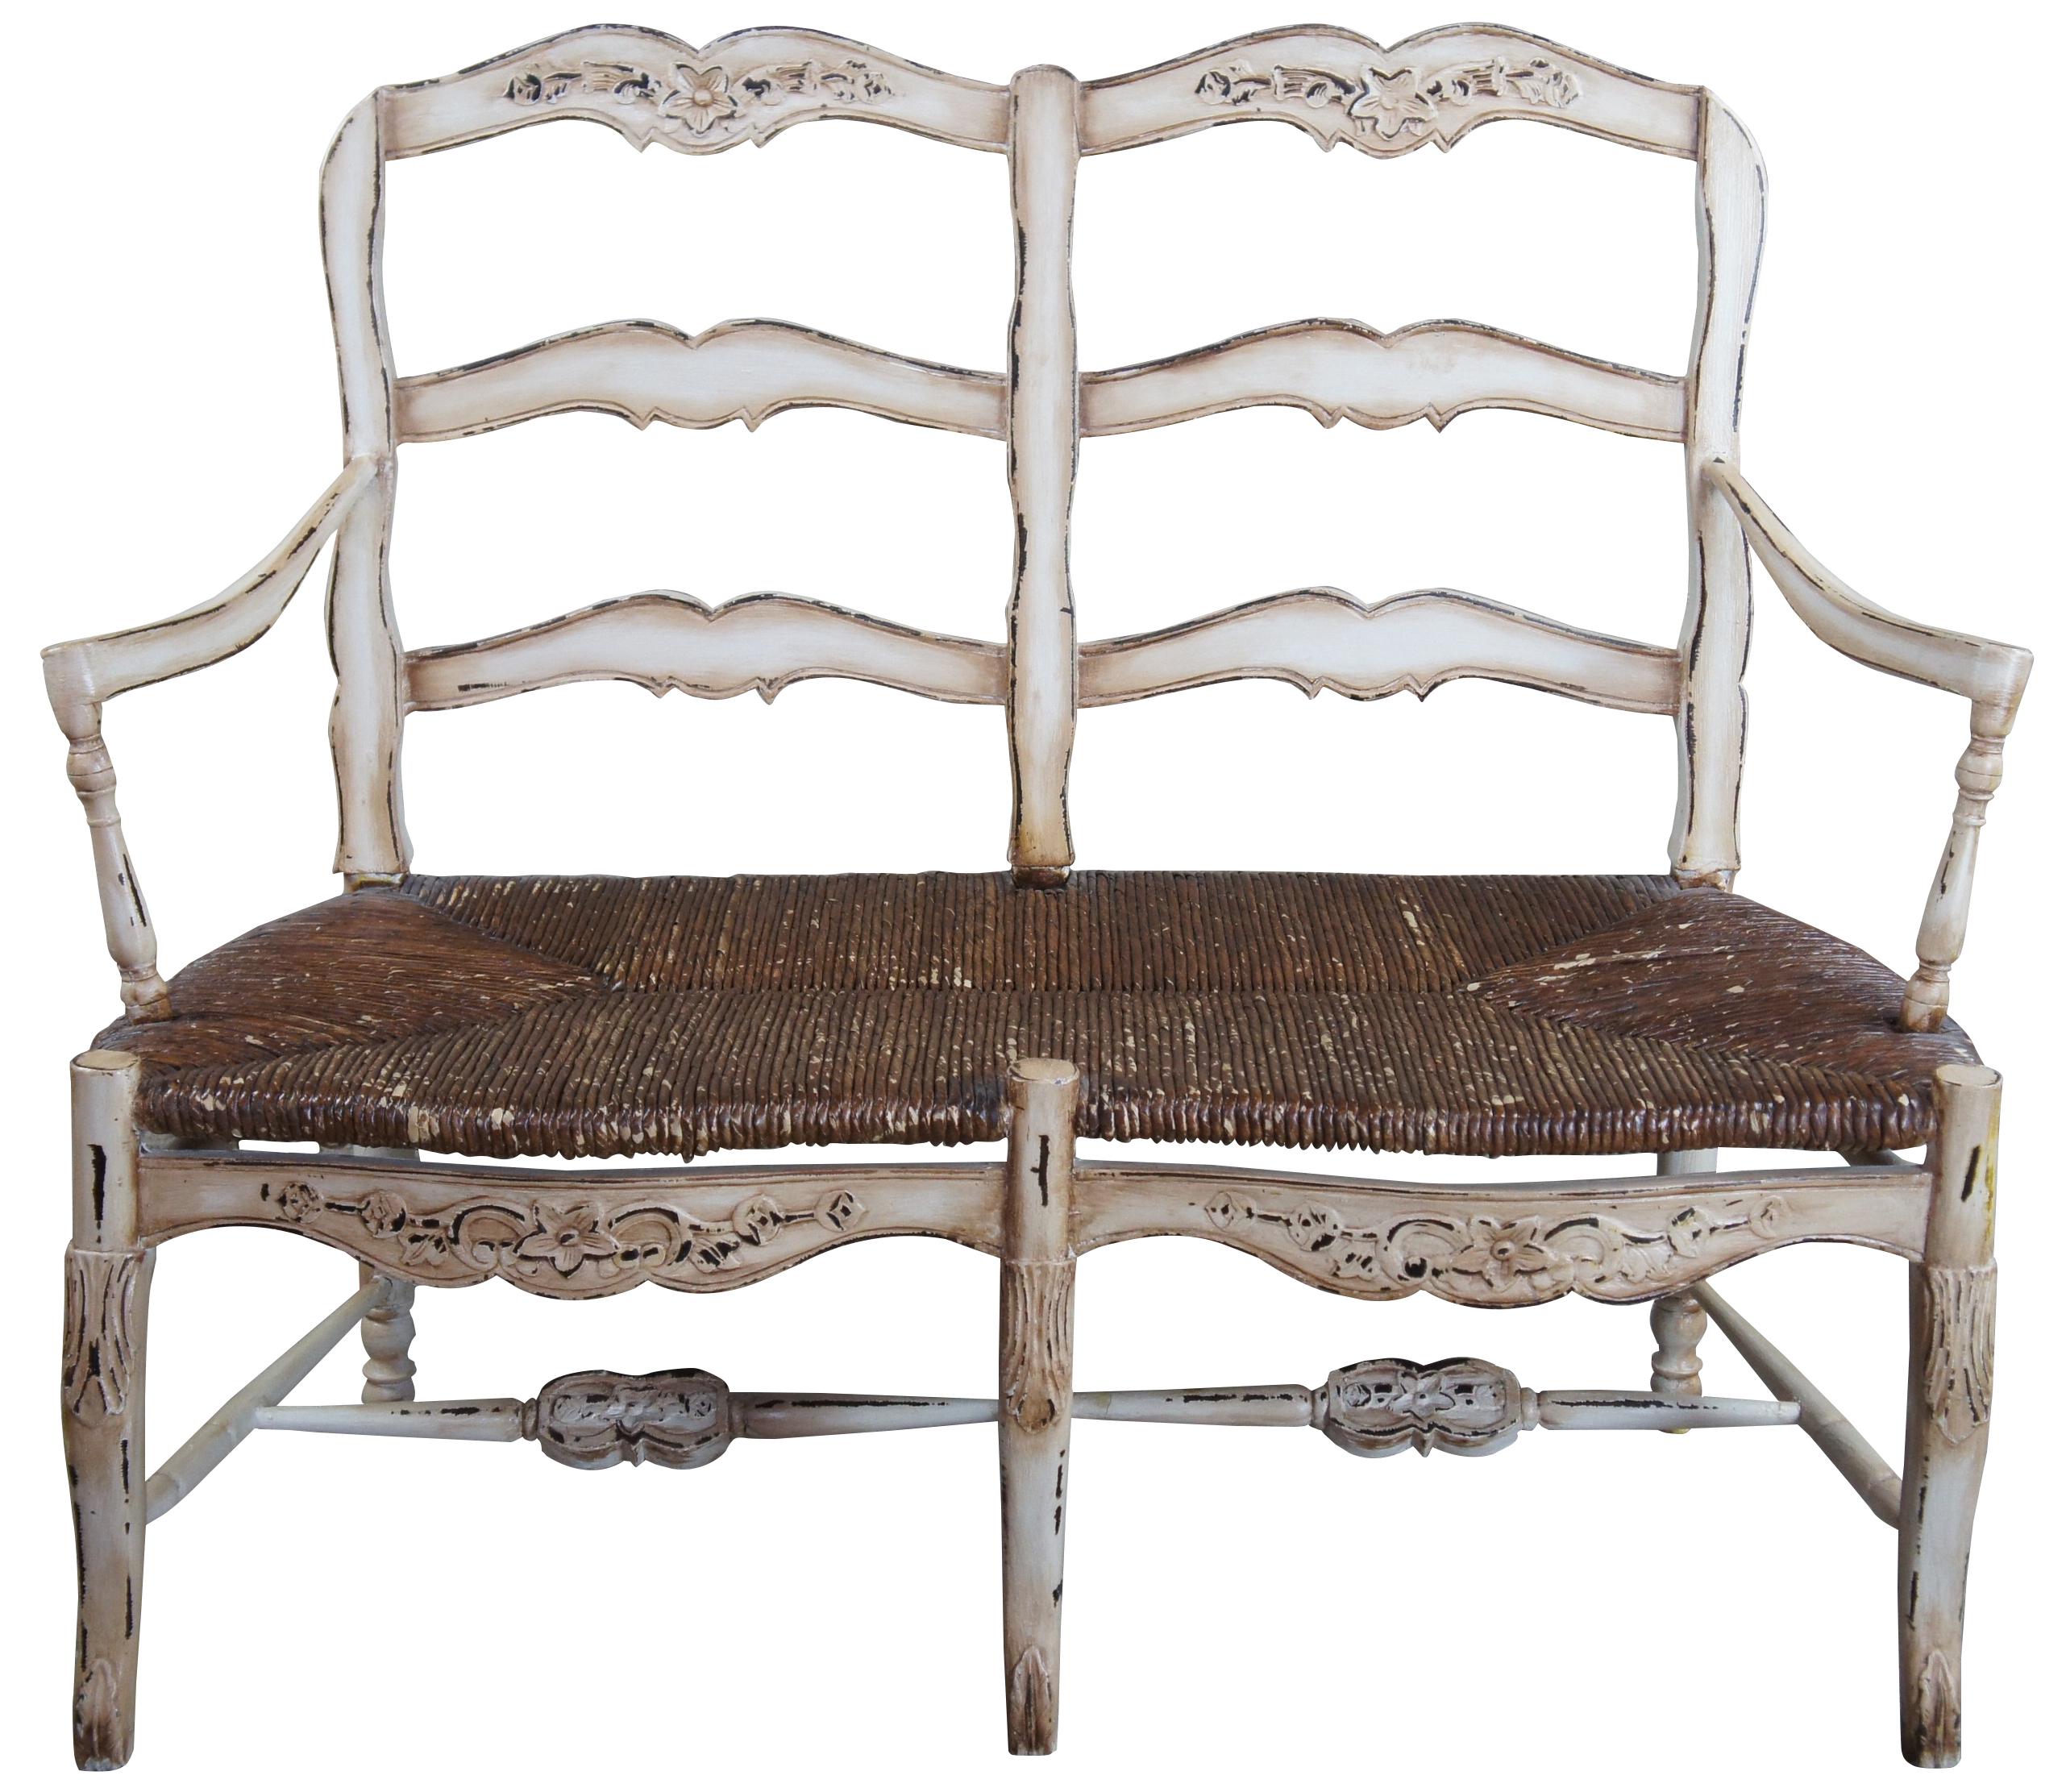 Vintage French Country chic 2 seater ladderback settee rush seat & cushion.